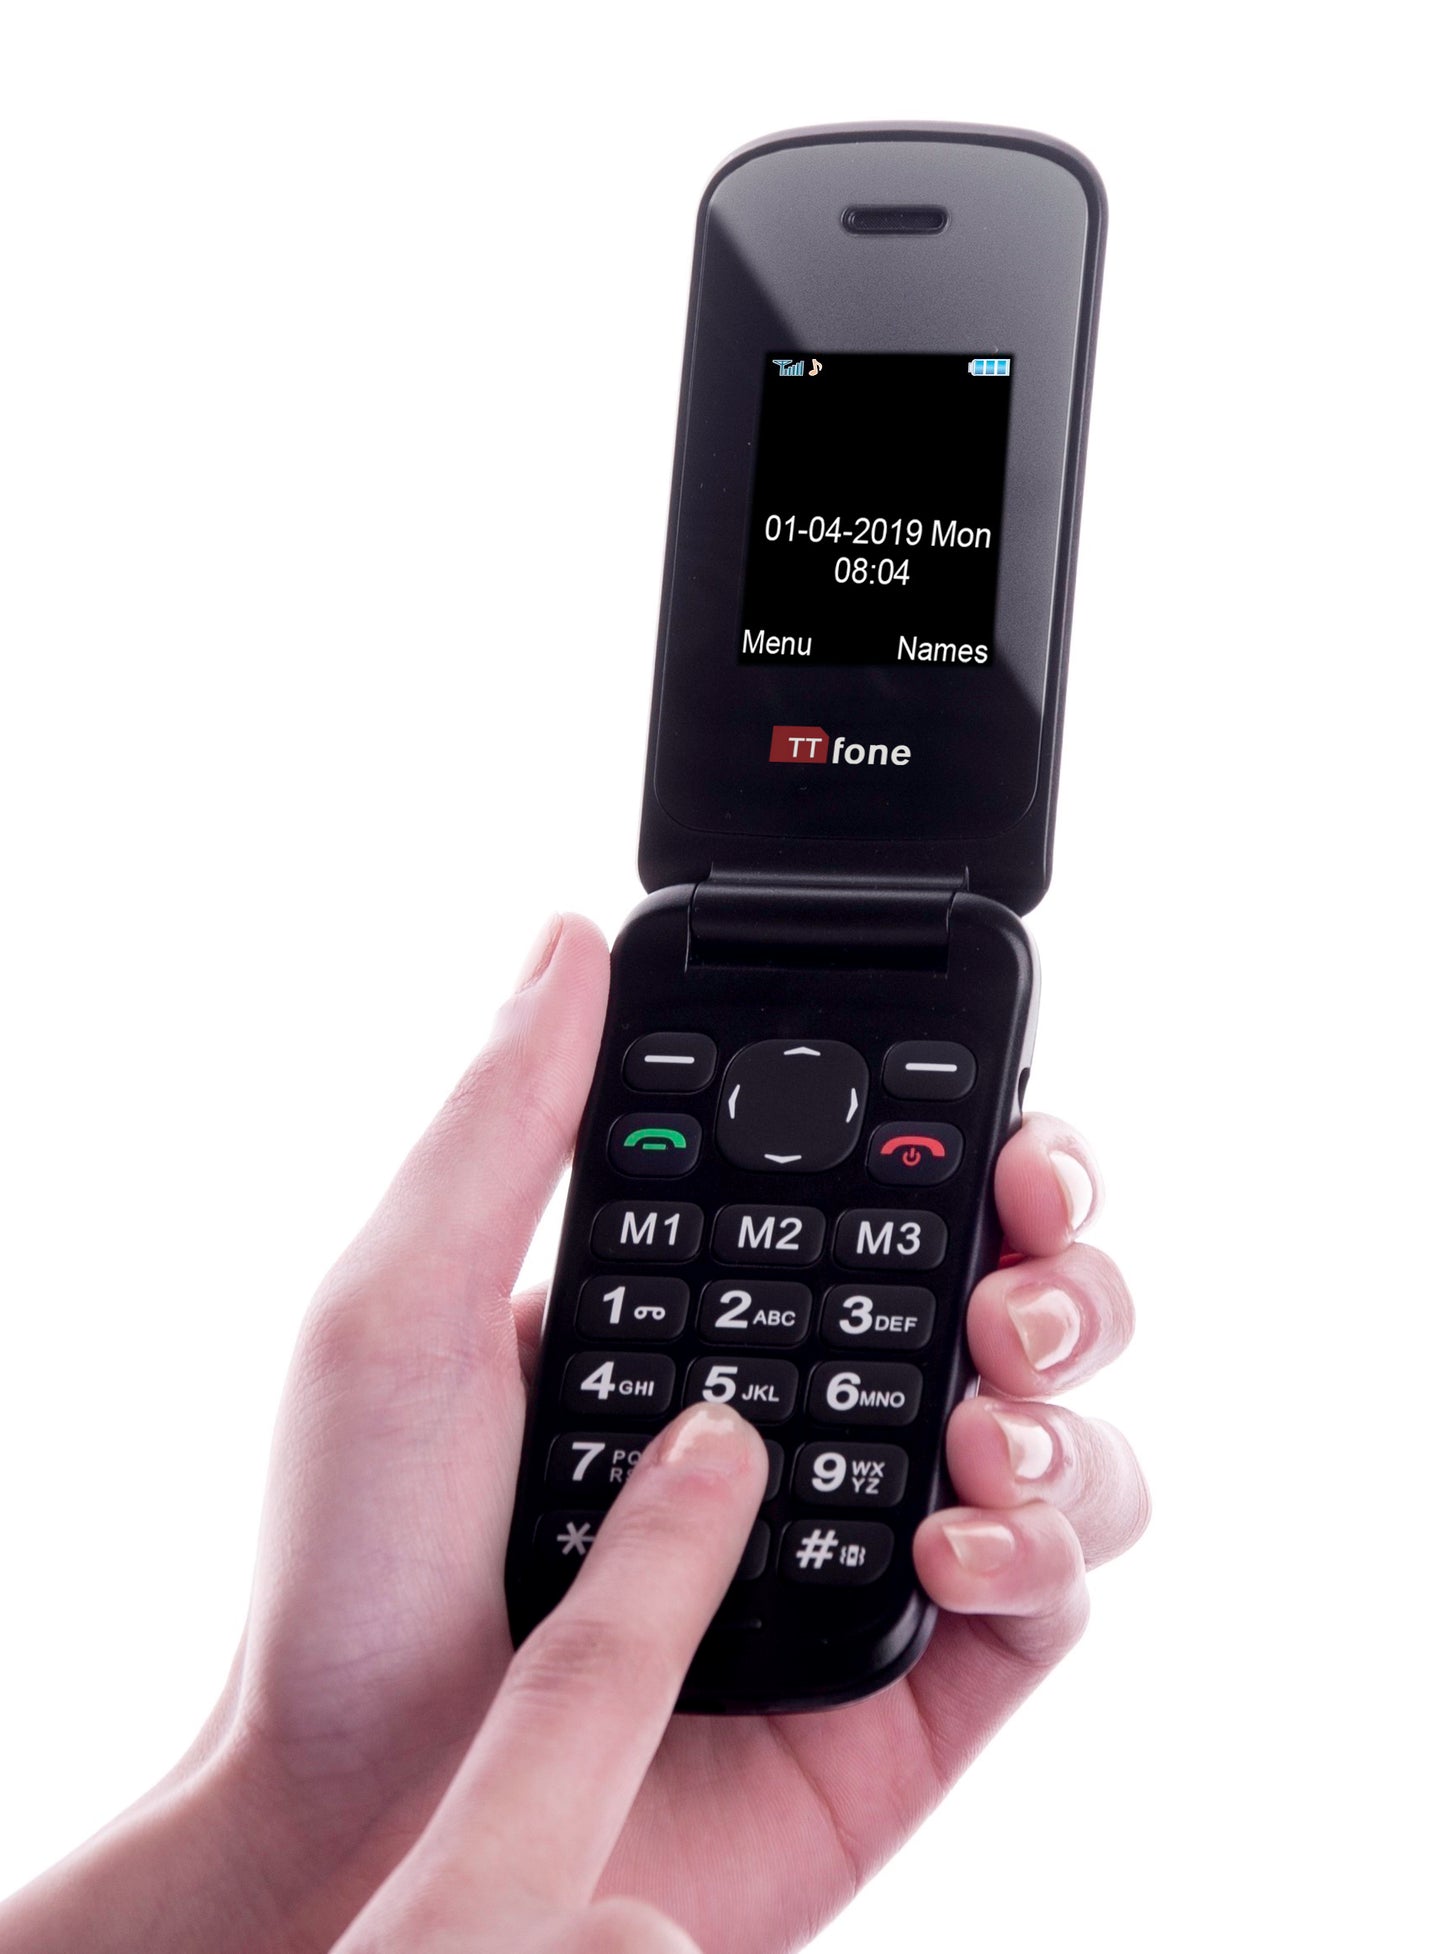 TTfone Black TT140 - Warehouse Deals with Mains Charger and Vodafone Pay As You Go